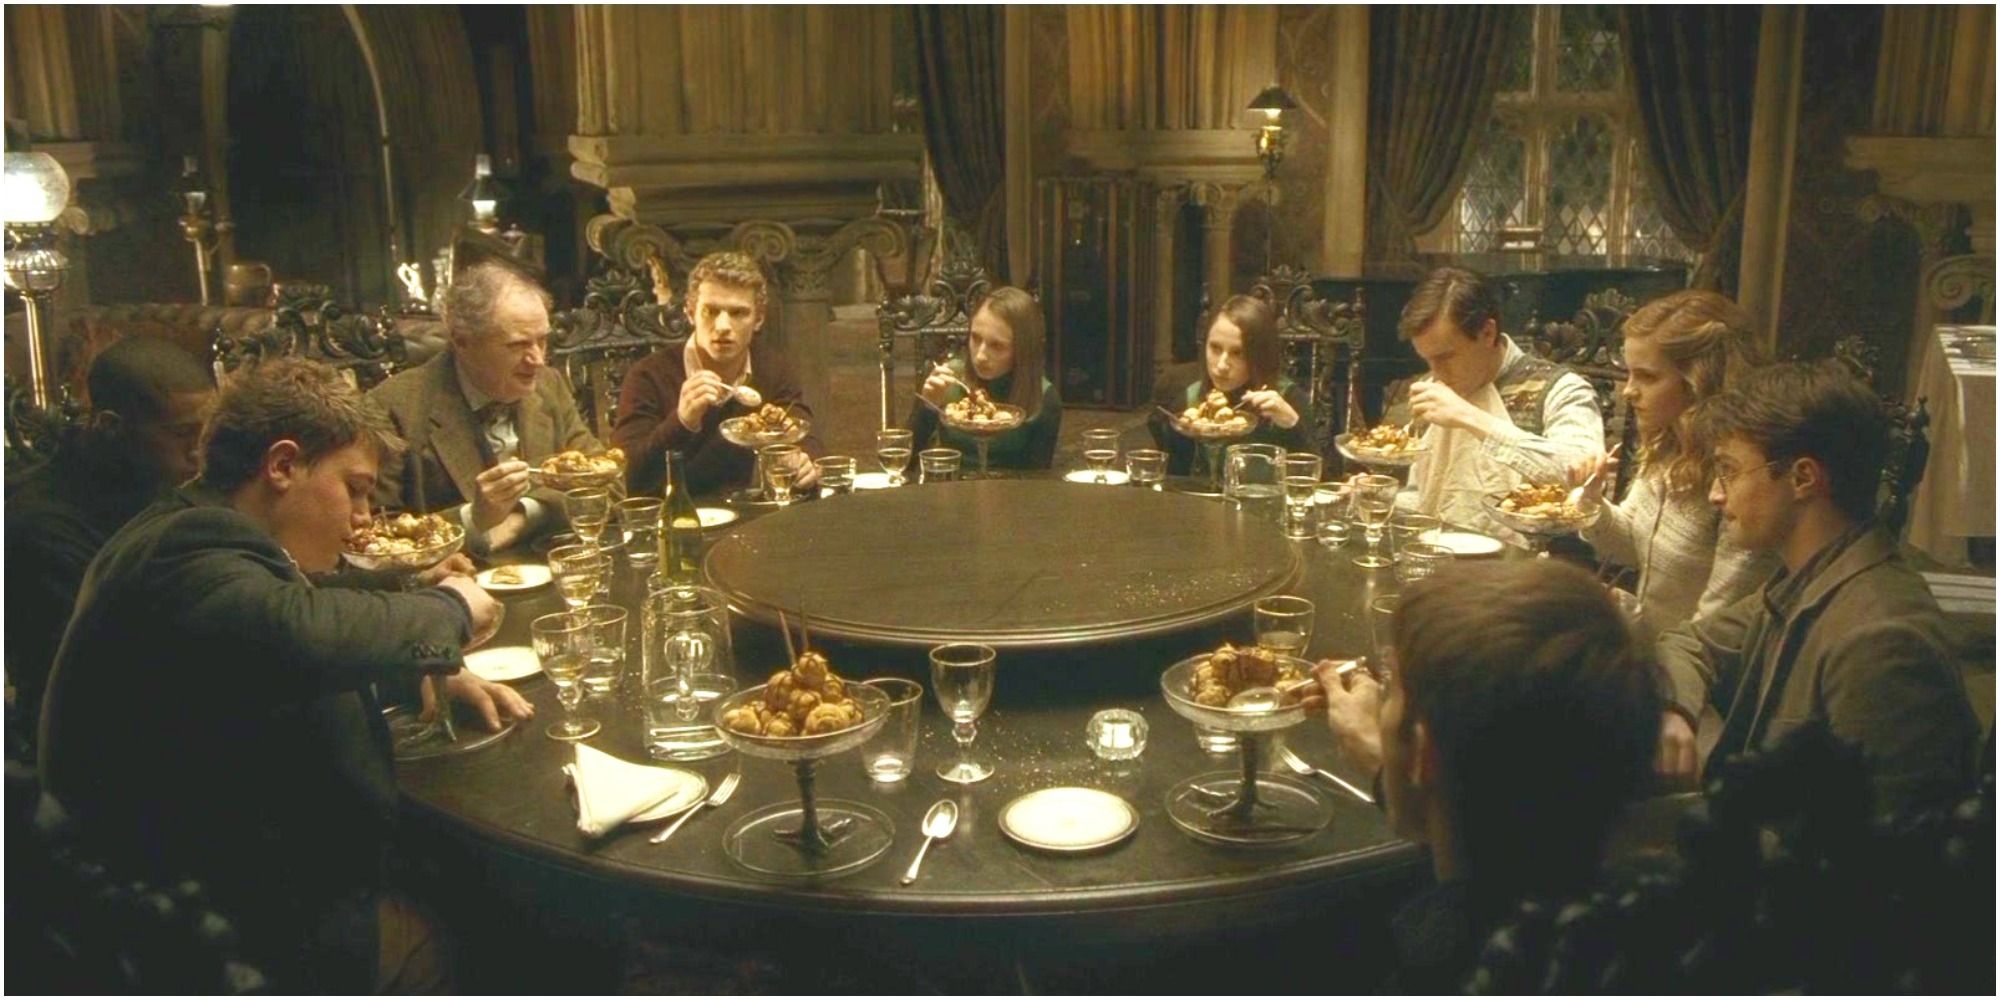 A screenshot of the Slug Club from Harry Potter and the Half-Blood Prince